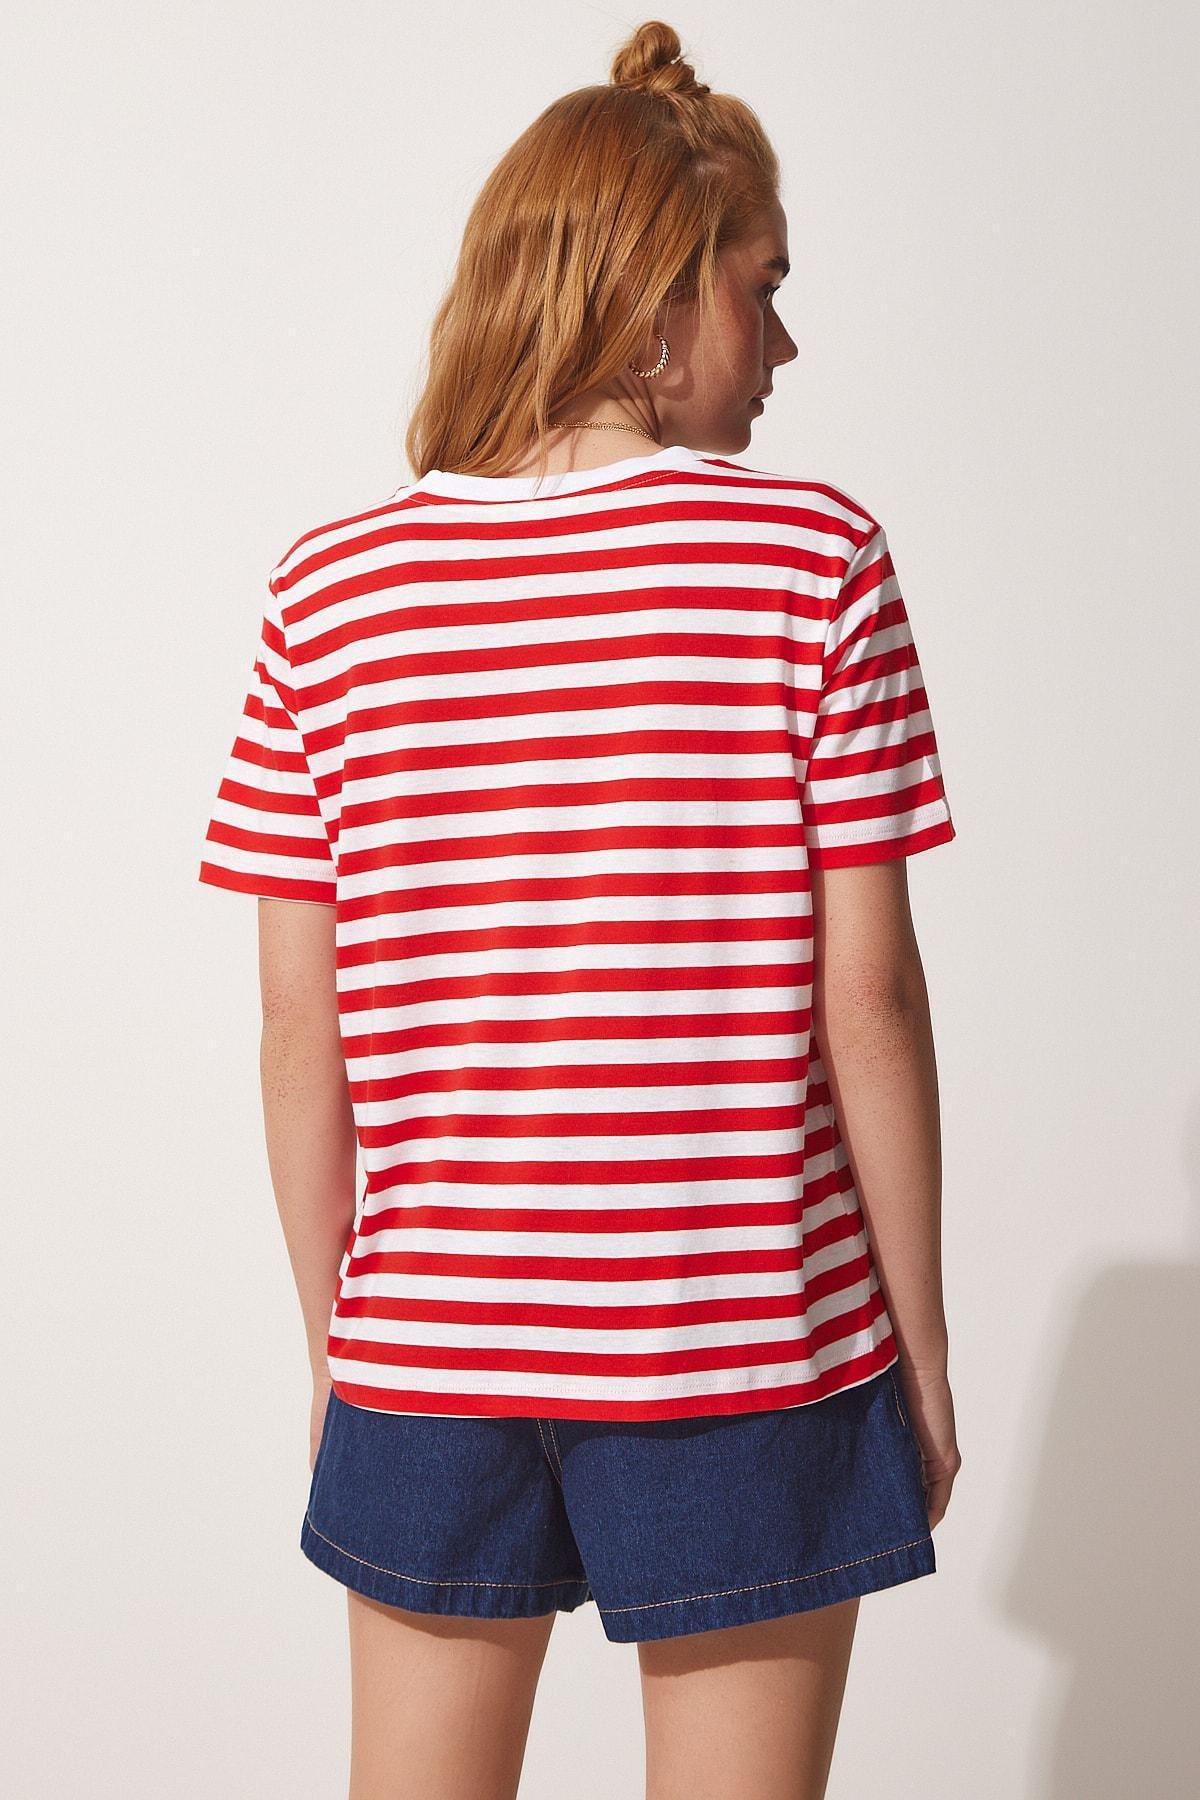 Happiness Istanbul - Red Striped T-Shirt